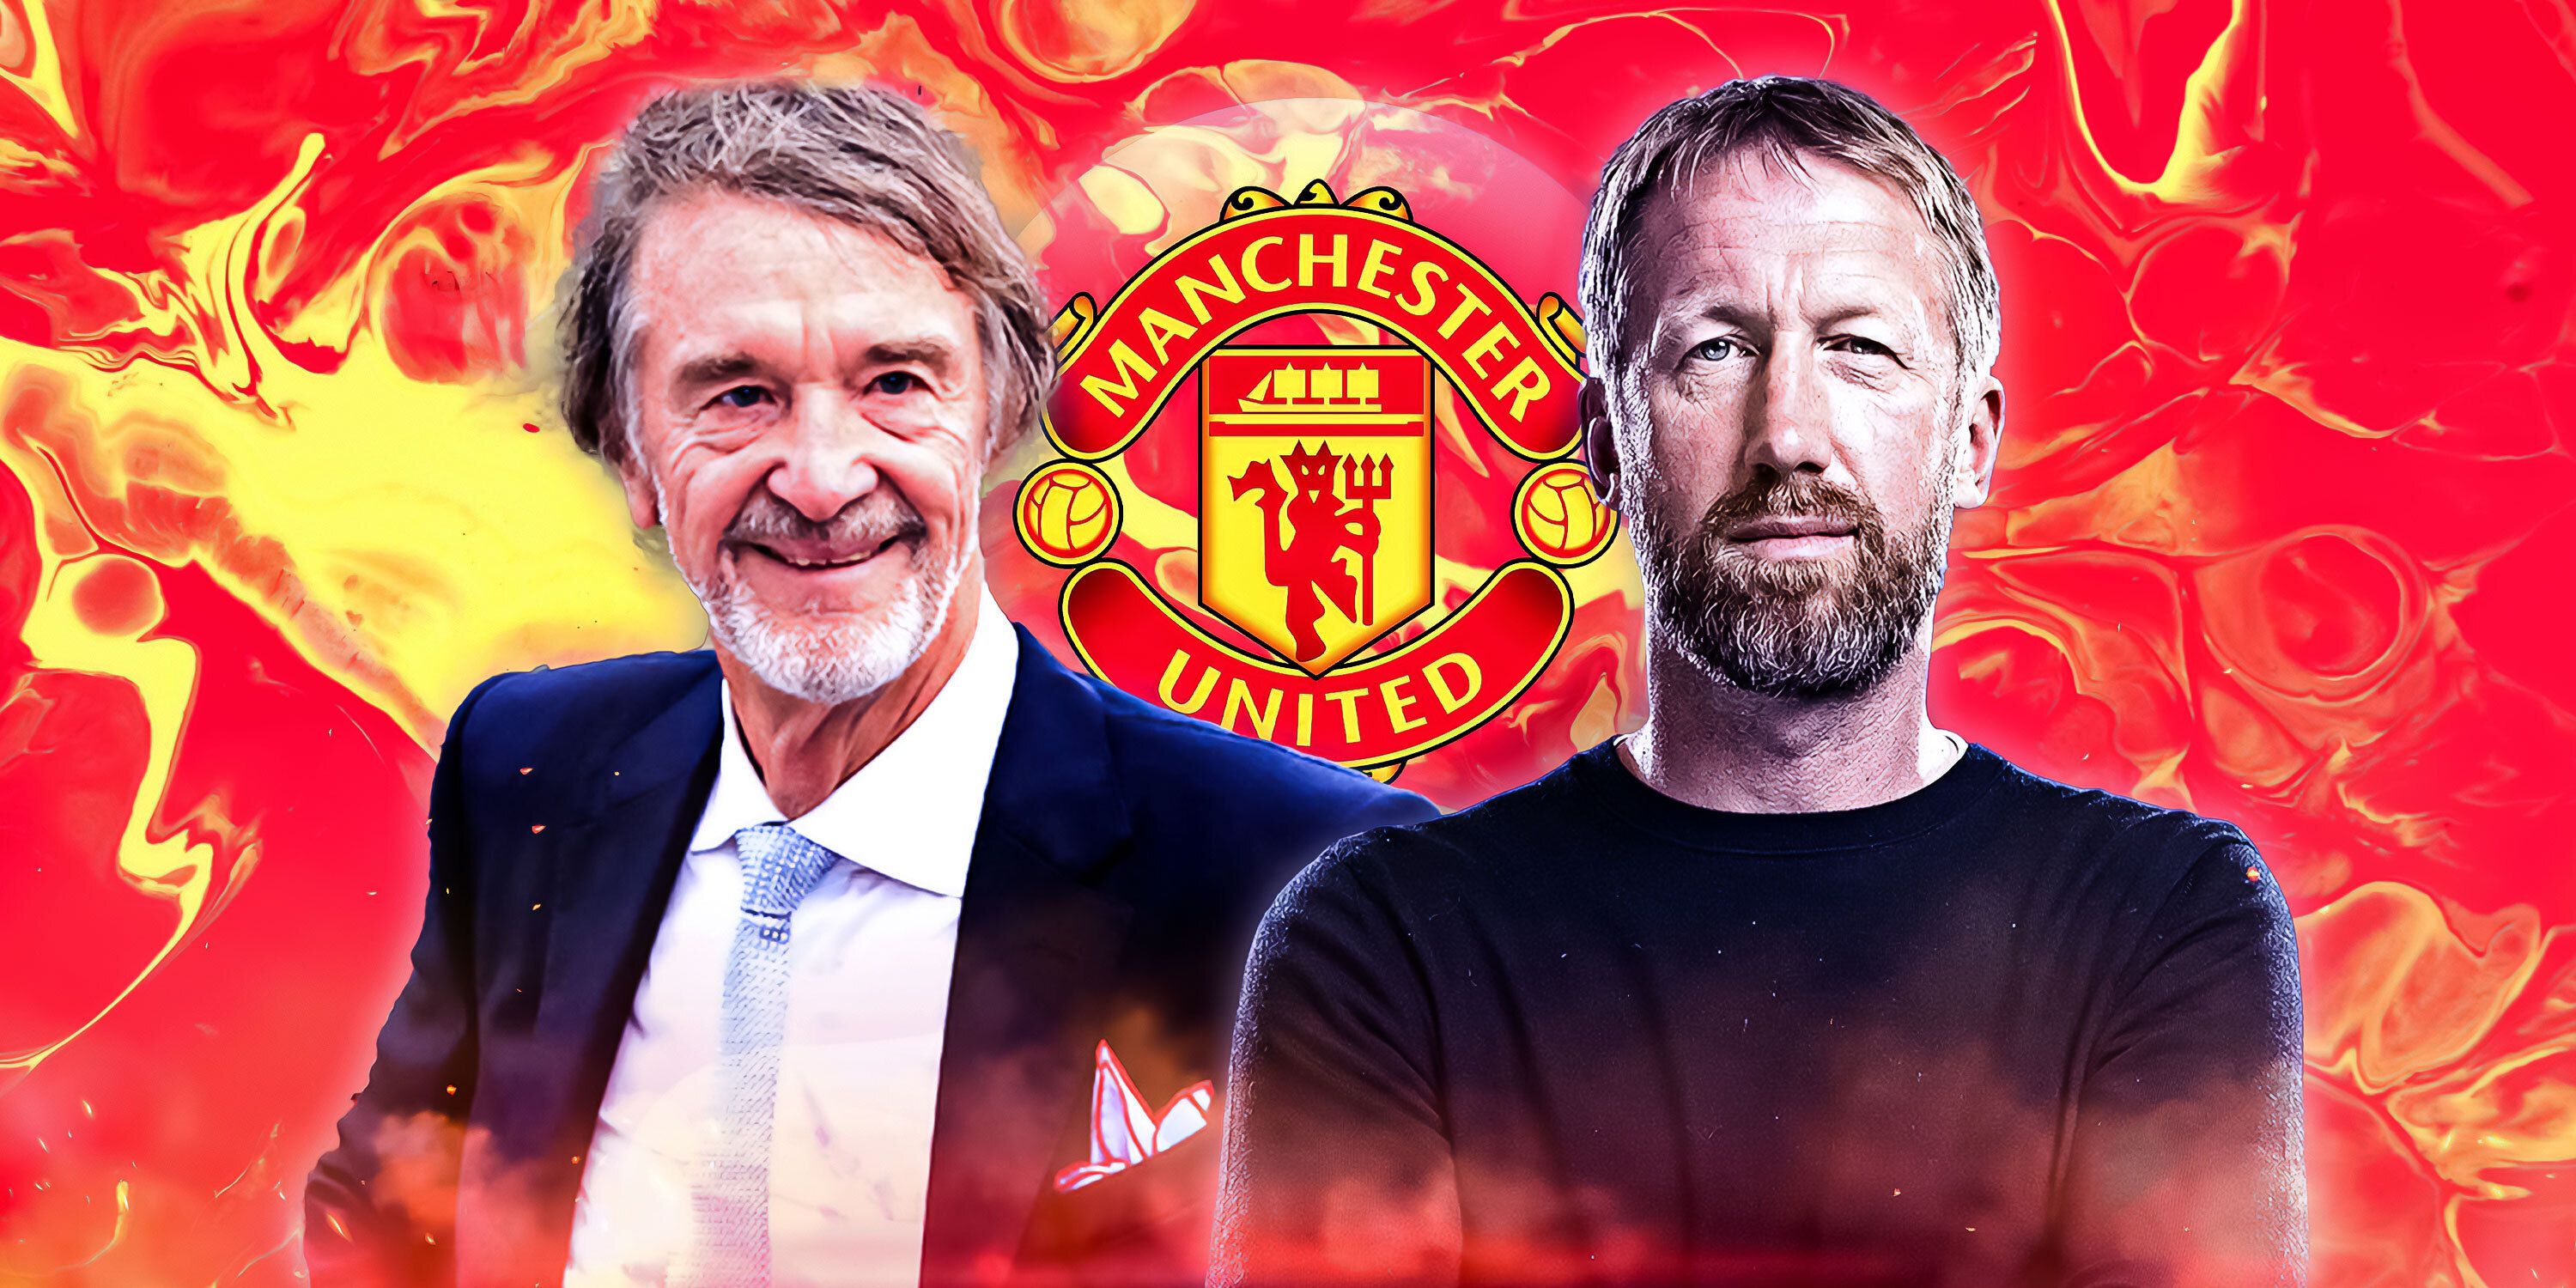 Manchester United co-owner Sir Jim Ratcliffe and Graham Potter